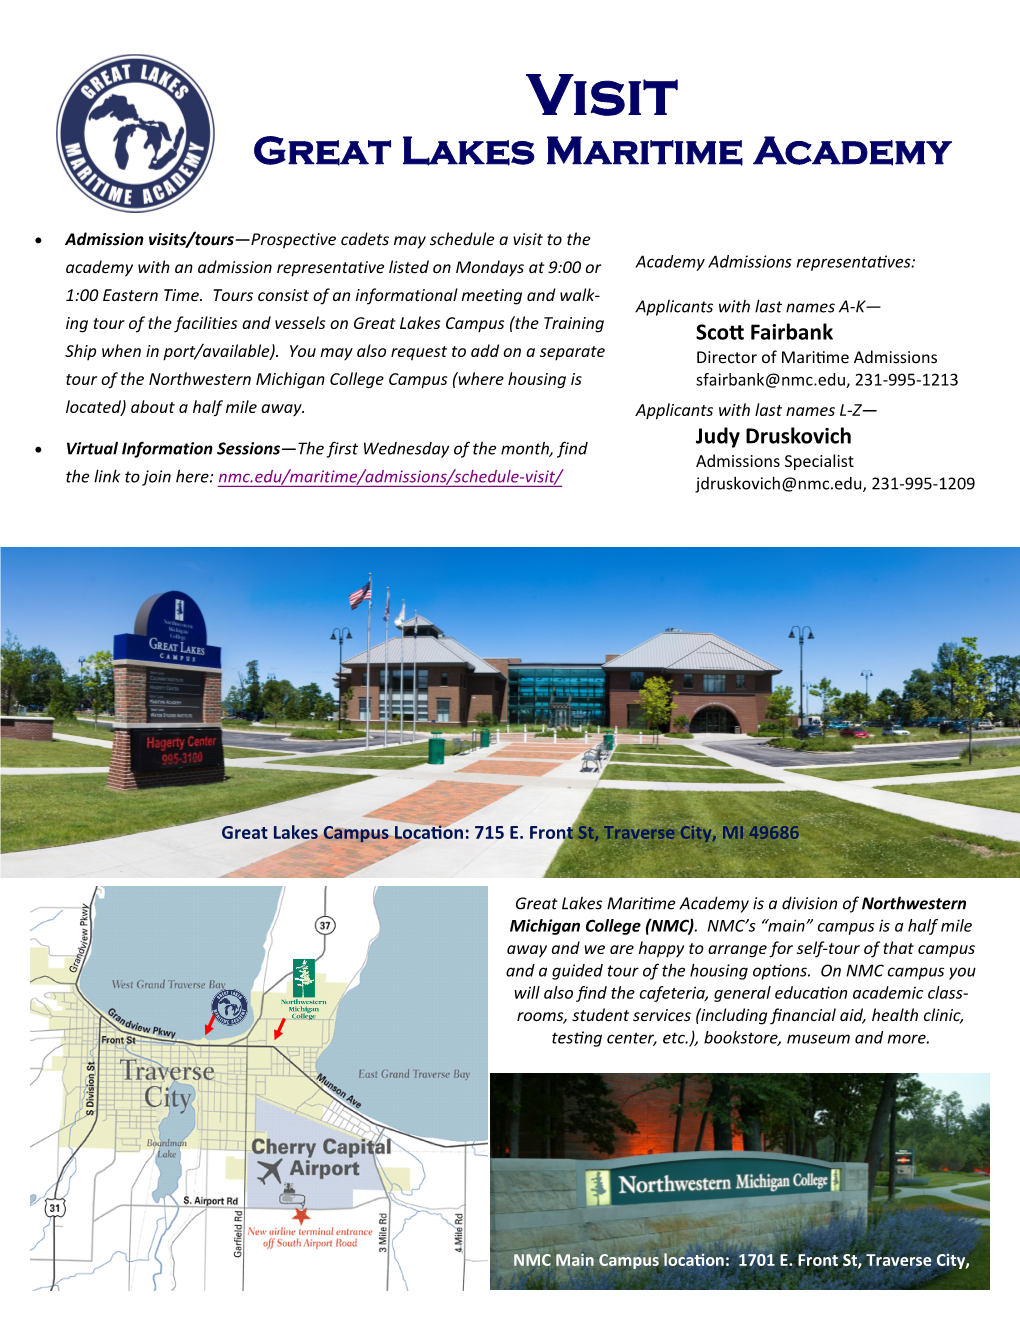 Guide to Visiting the Great Lakes Maritime Academy and Our Area